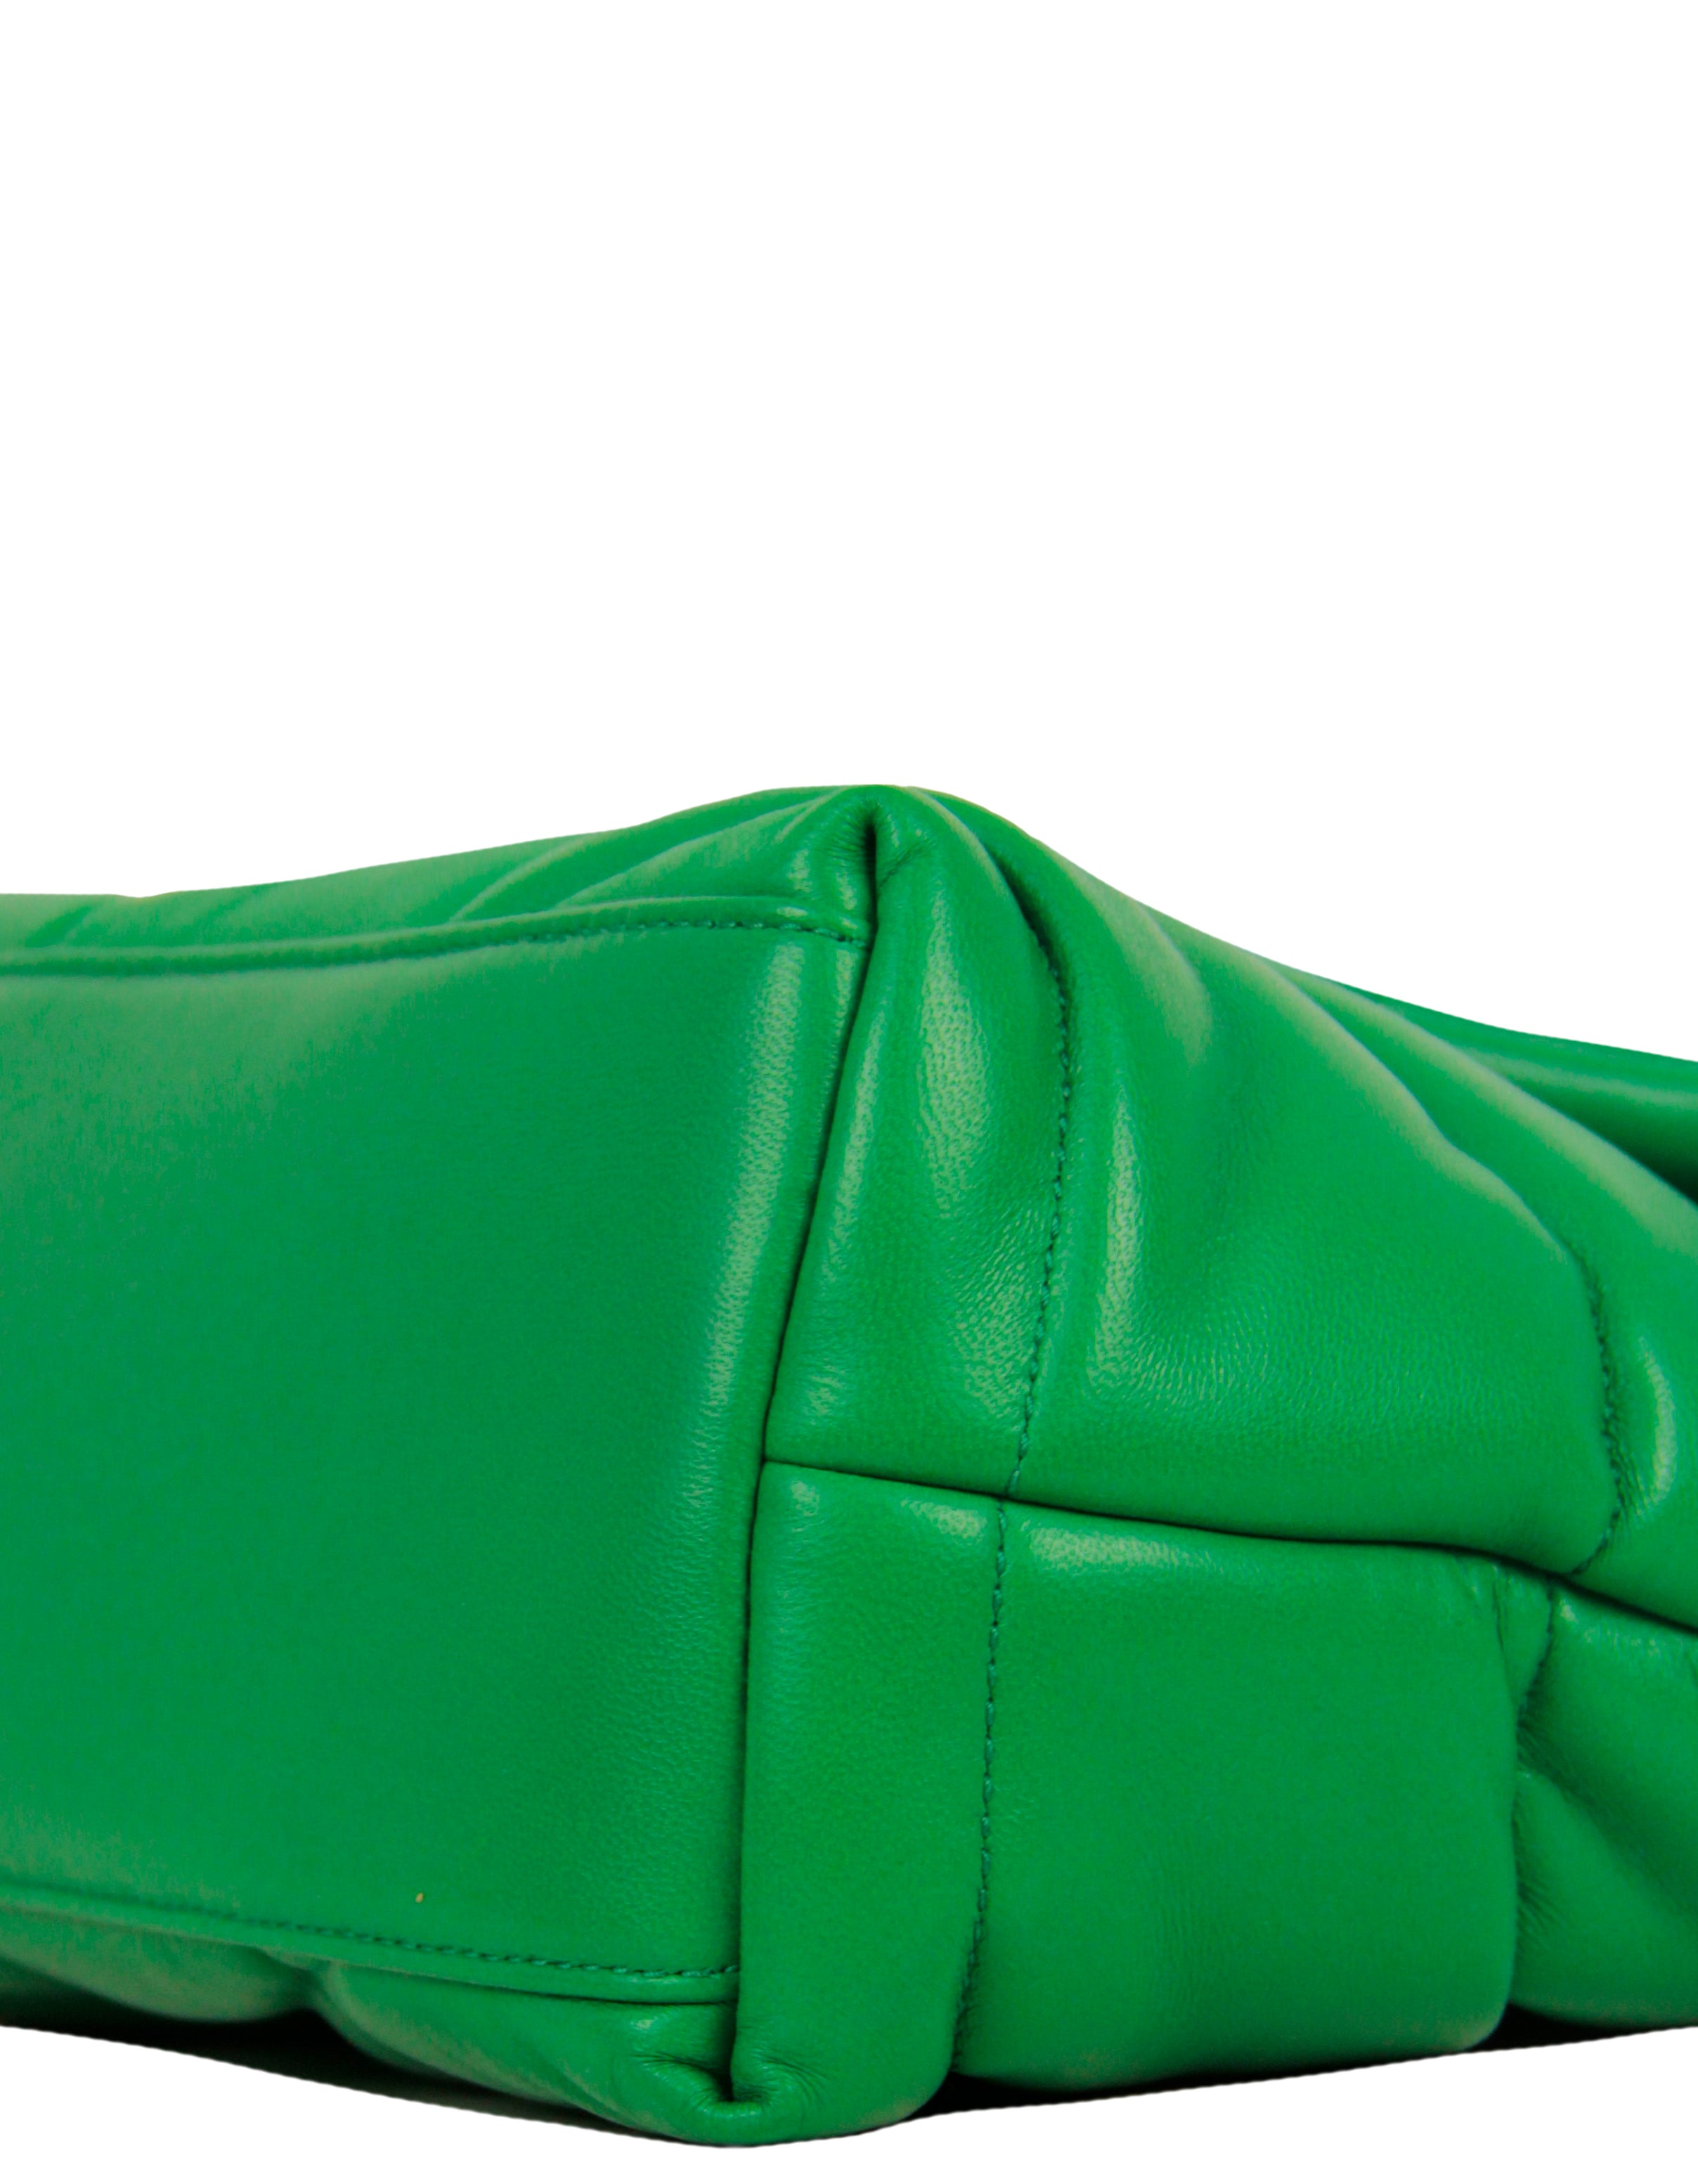 Saint Laurent Vert Praire Green Leather Small Loulou Puffer Bag